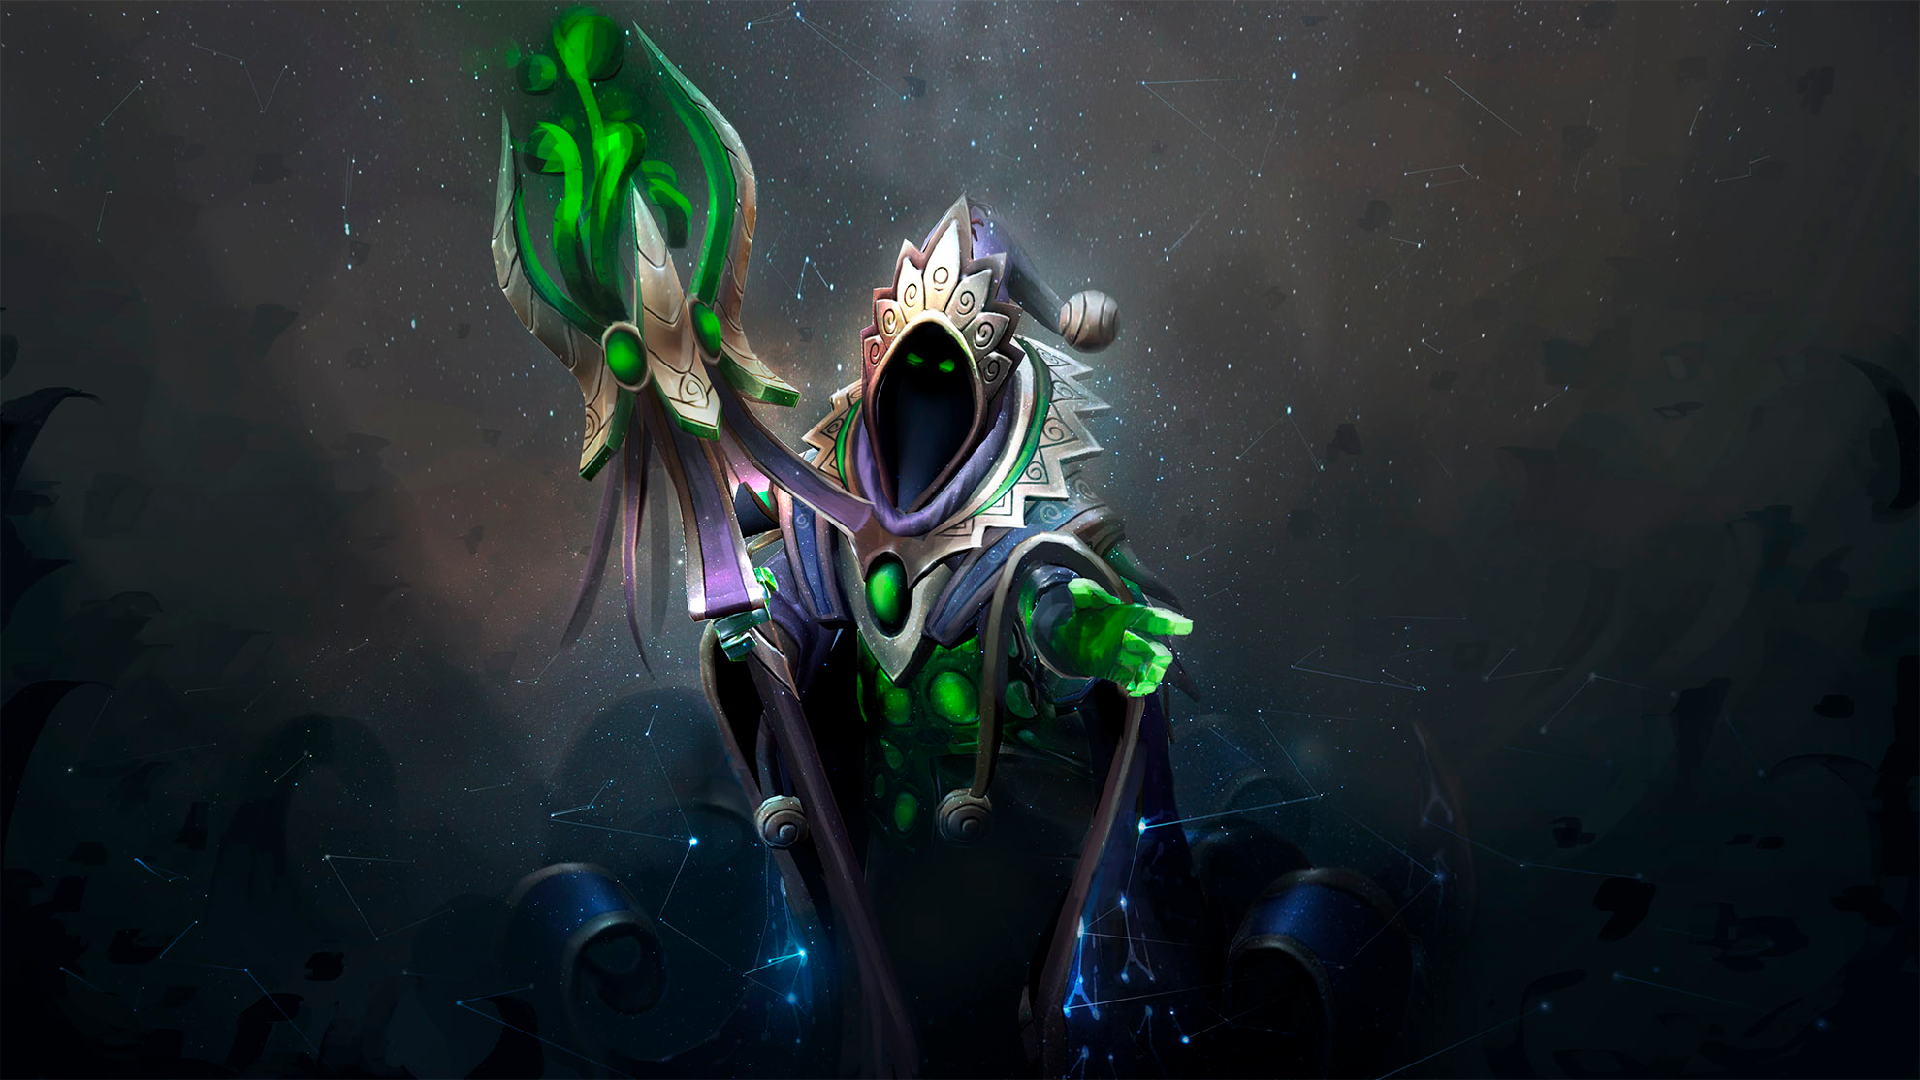 dota 2 wallpapers hd,darkness,pc game,graphic design,personal protective equipment,space